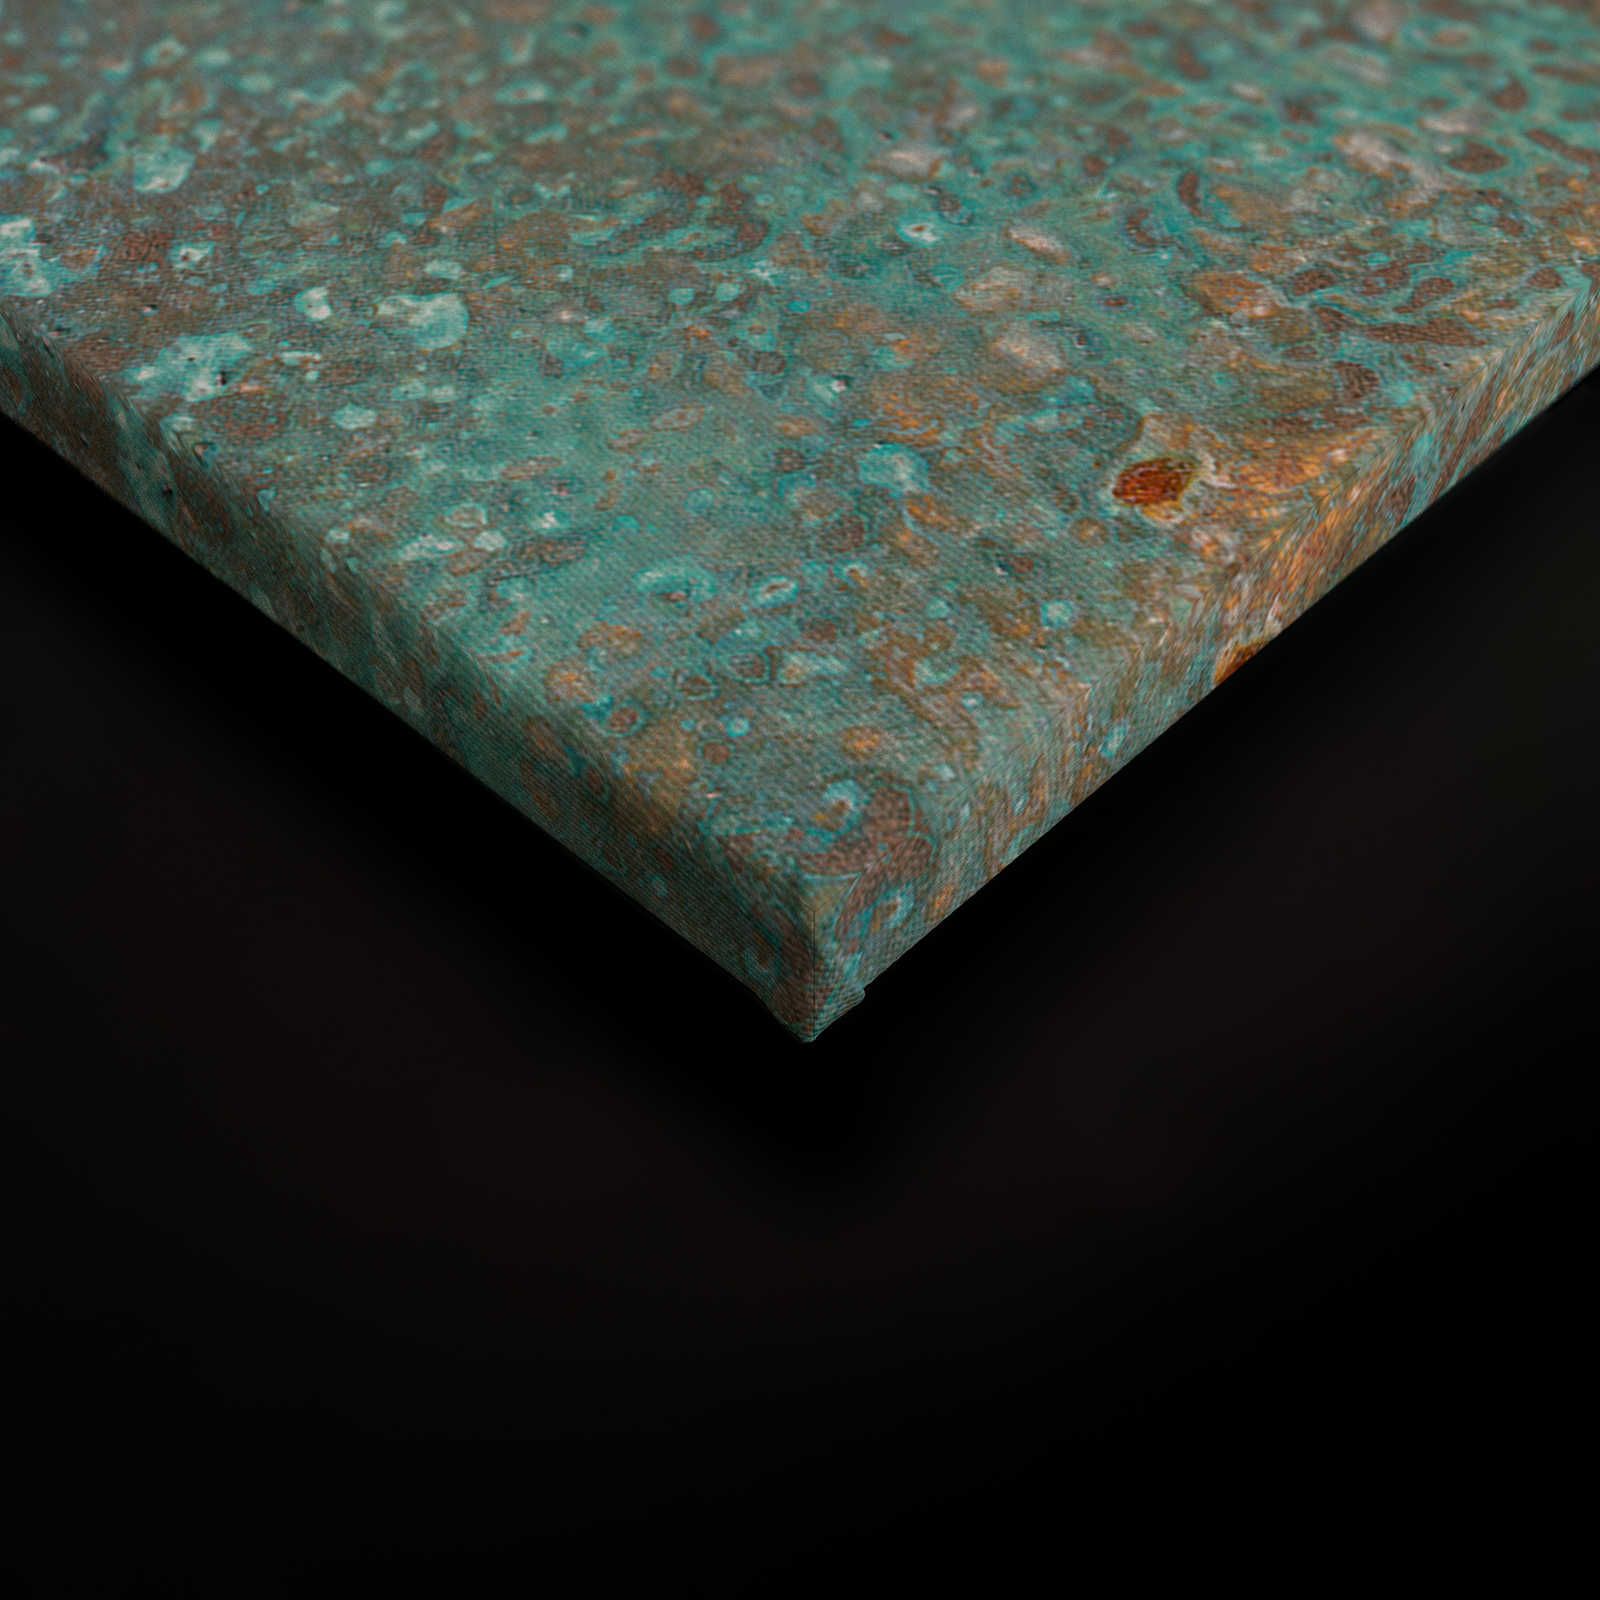             Metal Optics Canvas Painting Turquoise Patina with Rust - 1.20 m x 0.80 m
        